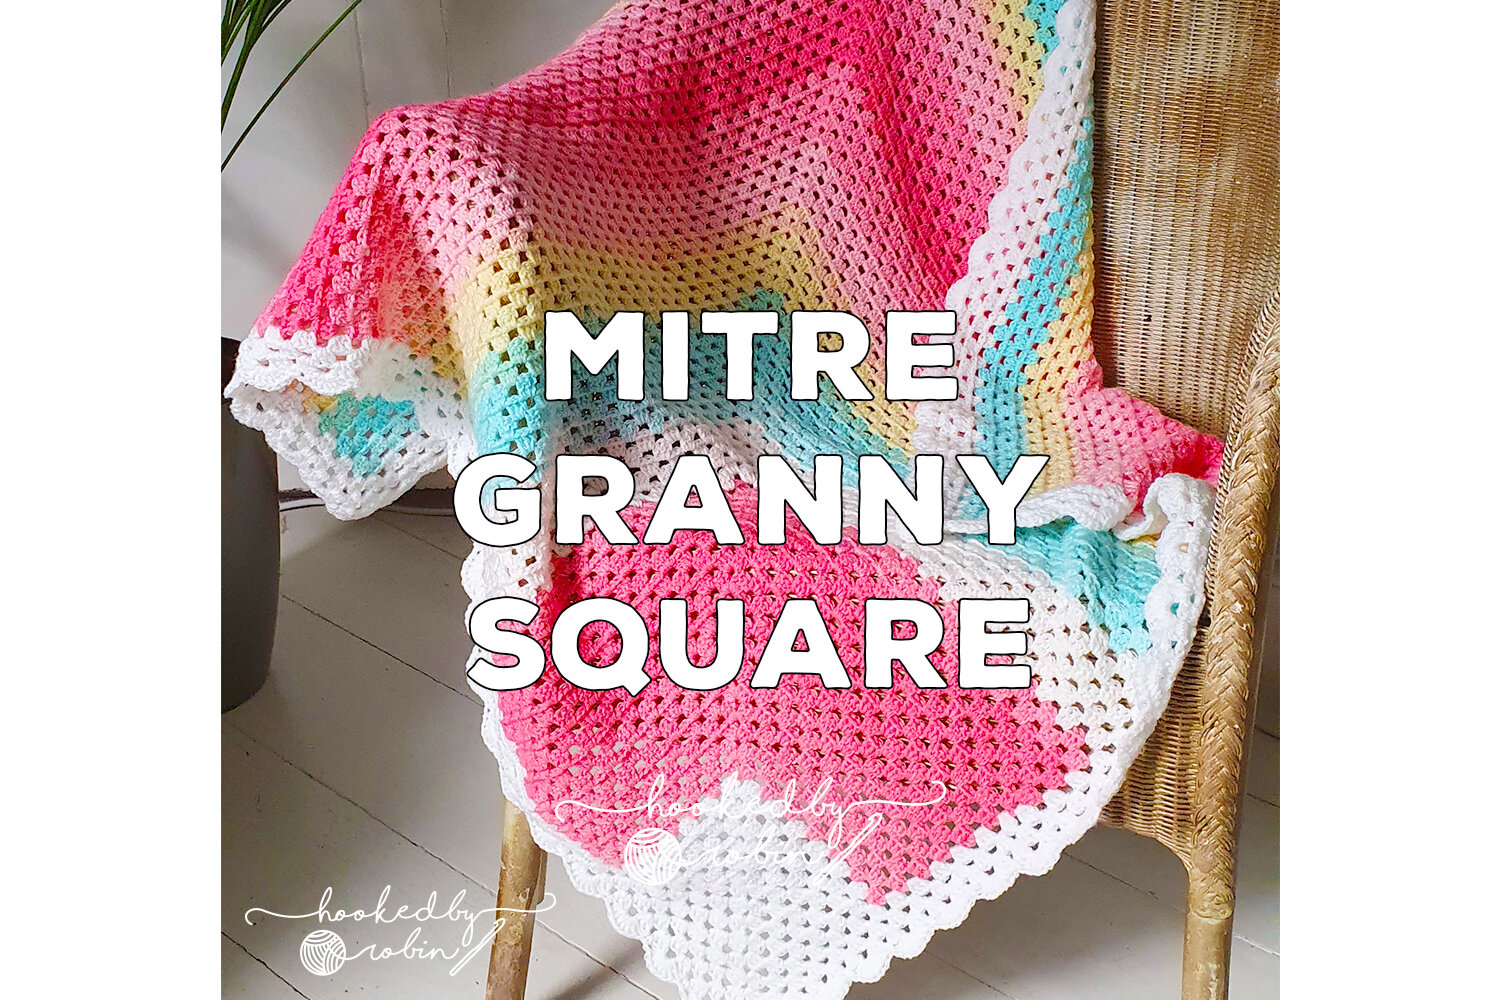 Crochet Colour Work Granny Squares — Hooked by Robin